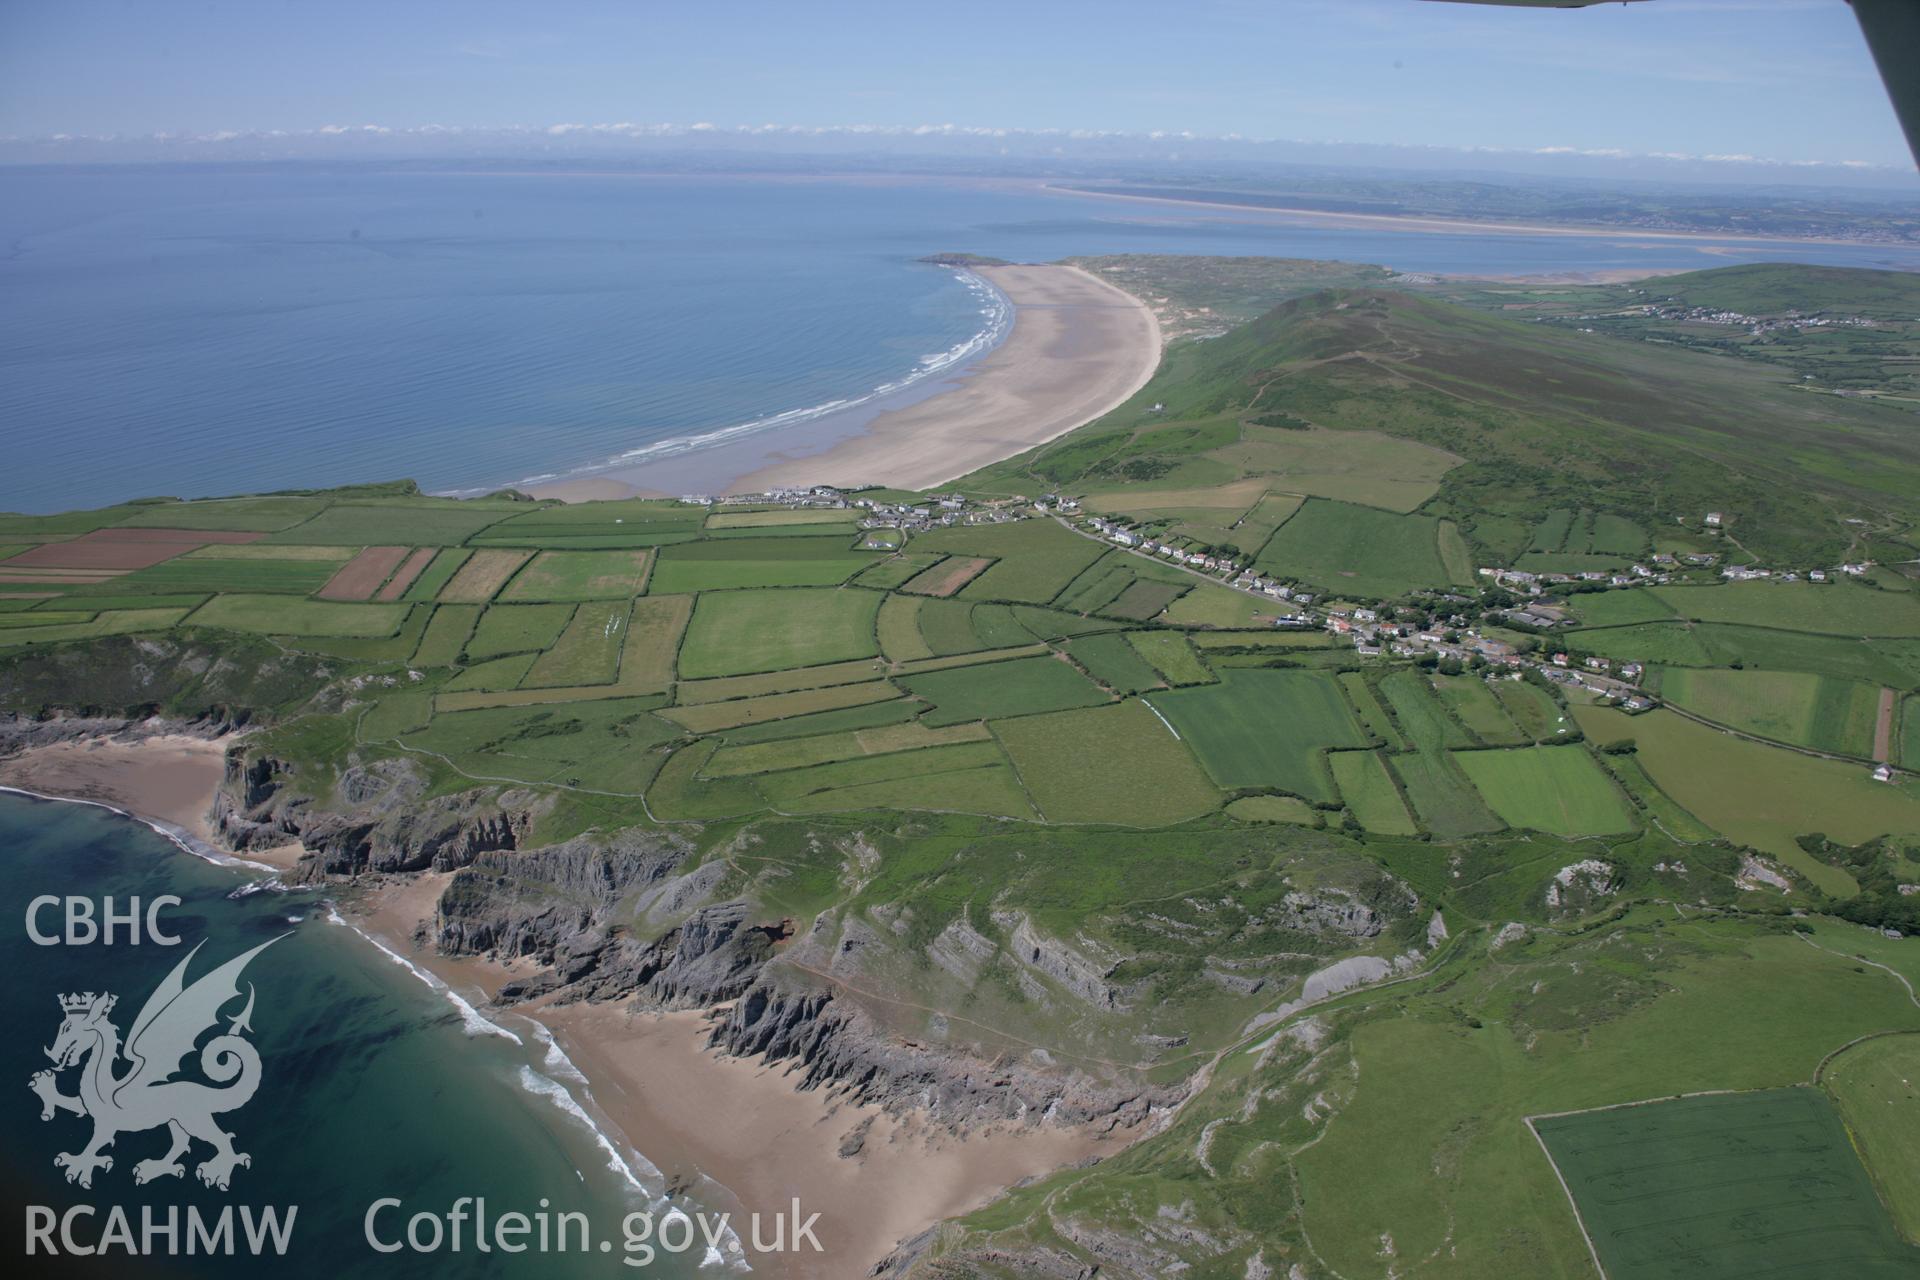 RCAHMW colour oblique aerial photograph of Rhossili Field System (The Vile). A panoramic view from the south-east towards Rhossili Bay. Taken on 22 June 2005 by Toby Driver